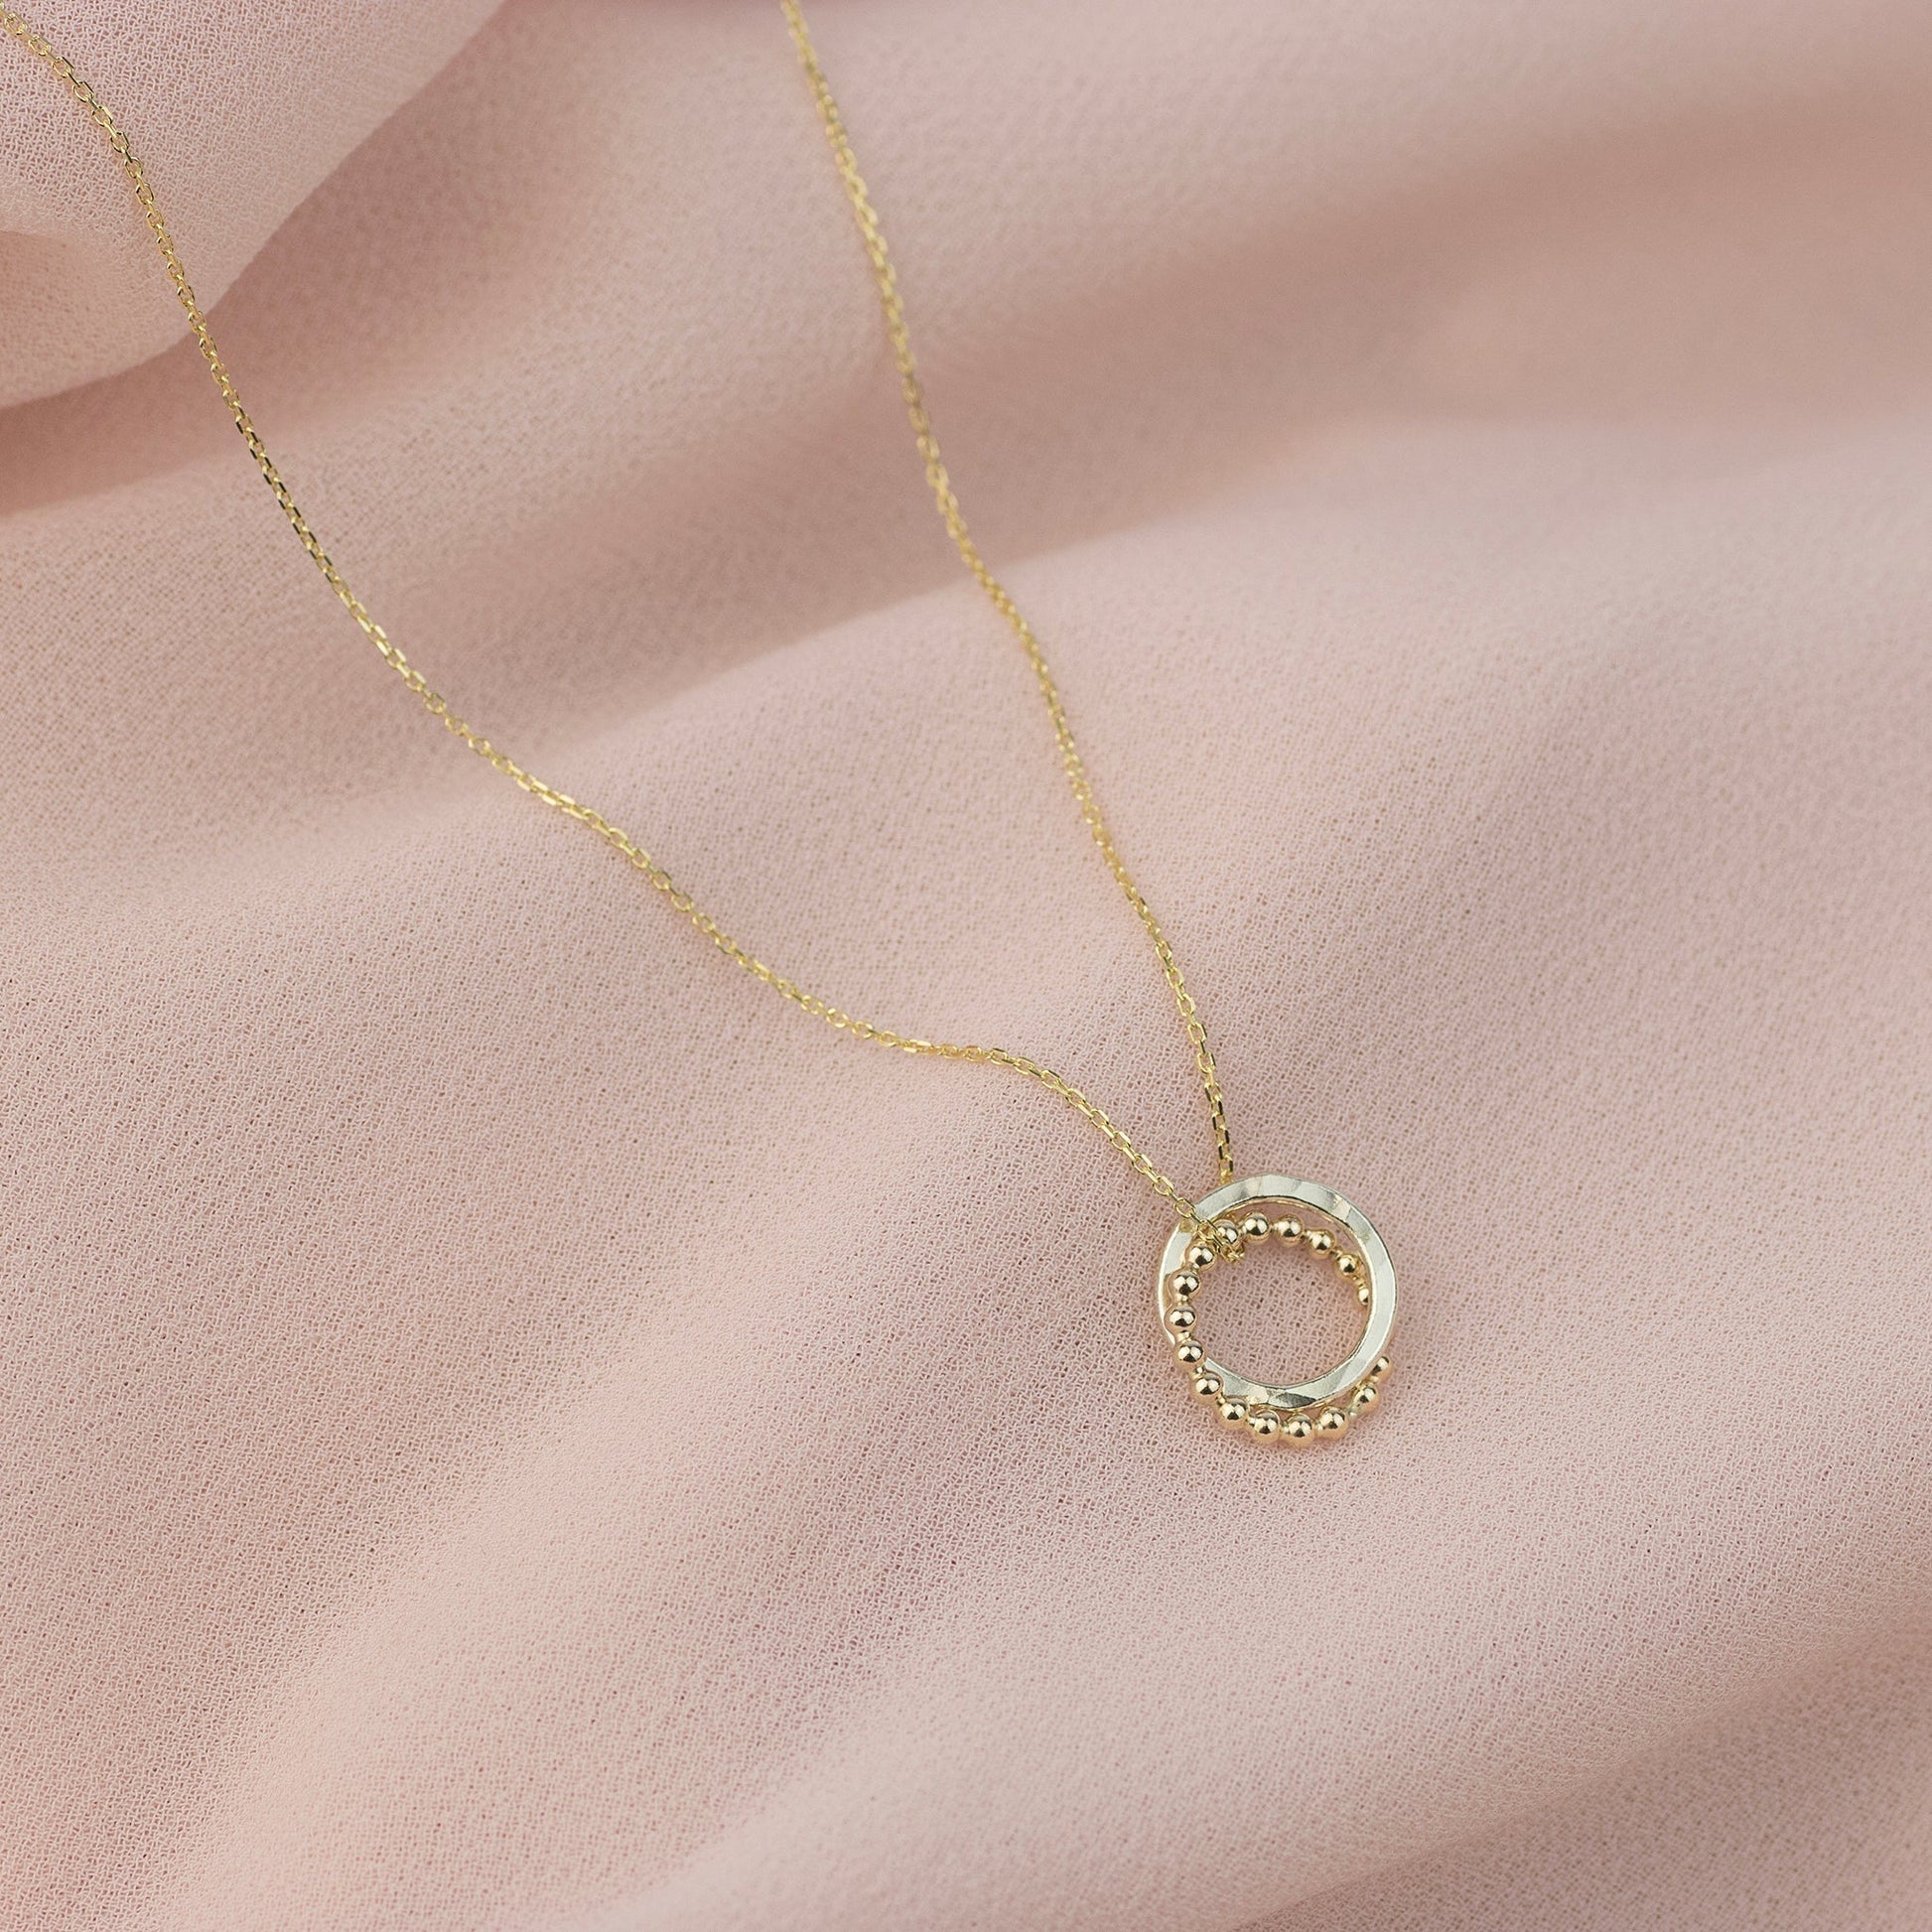 Gift for Cousin - 9kt Gold & Silver Love Knot Necklace